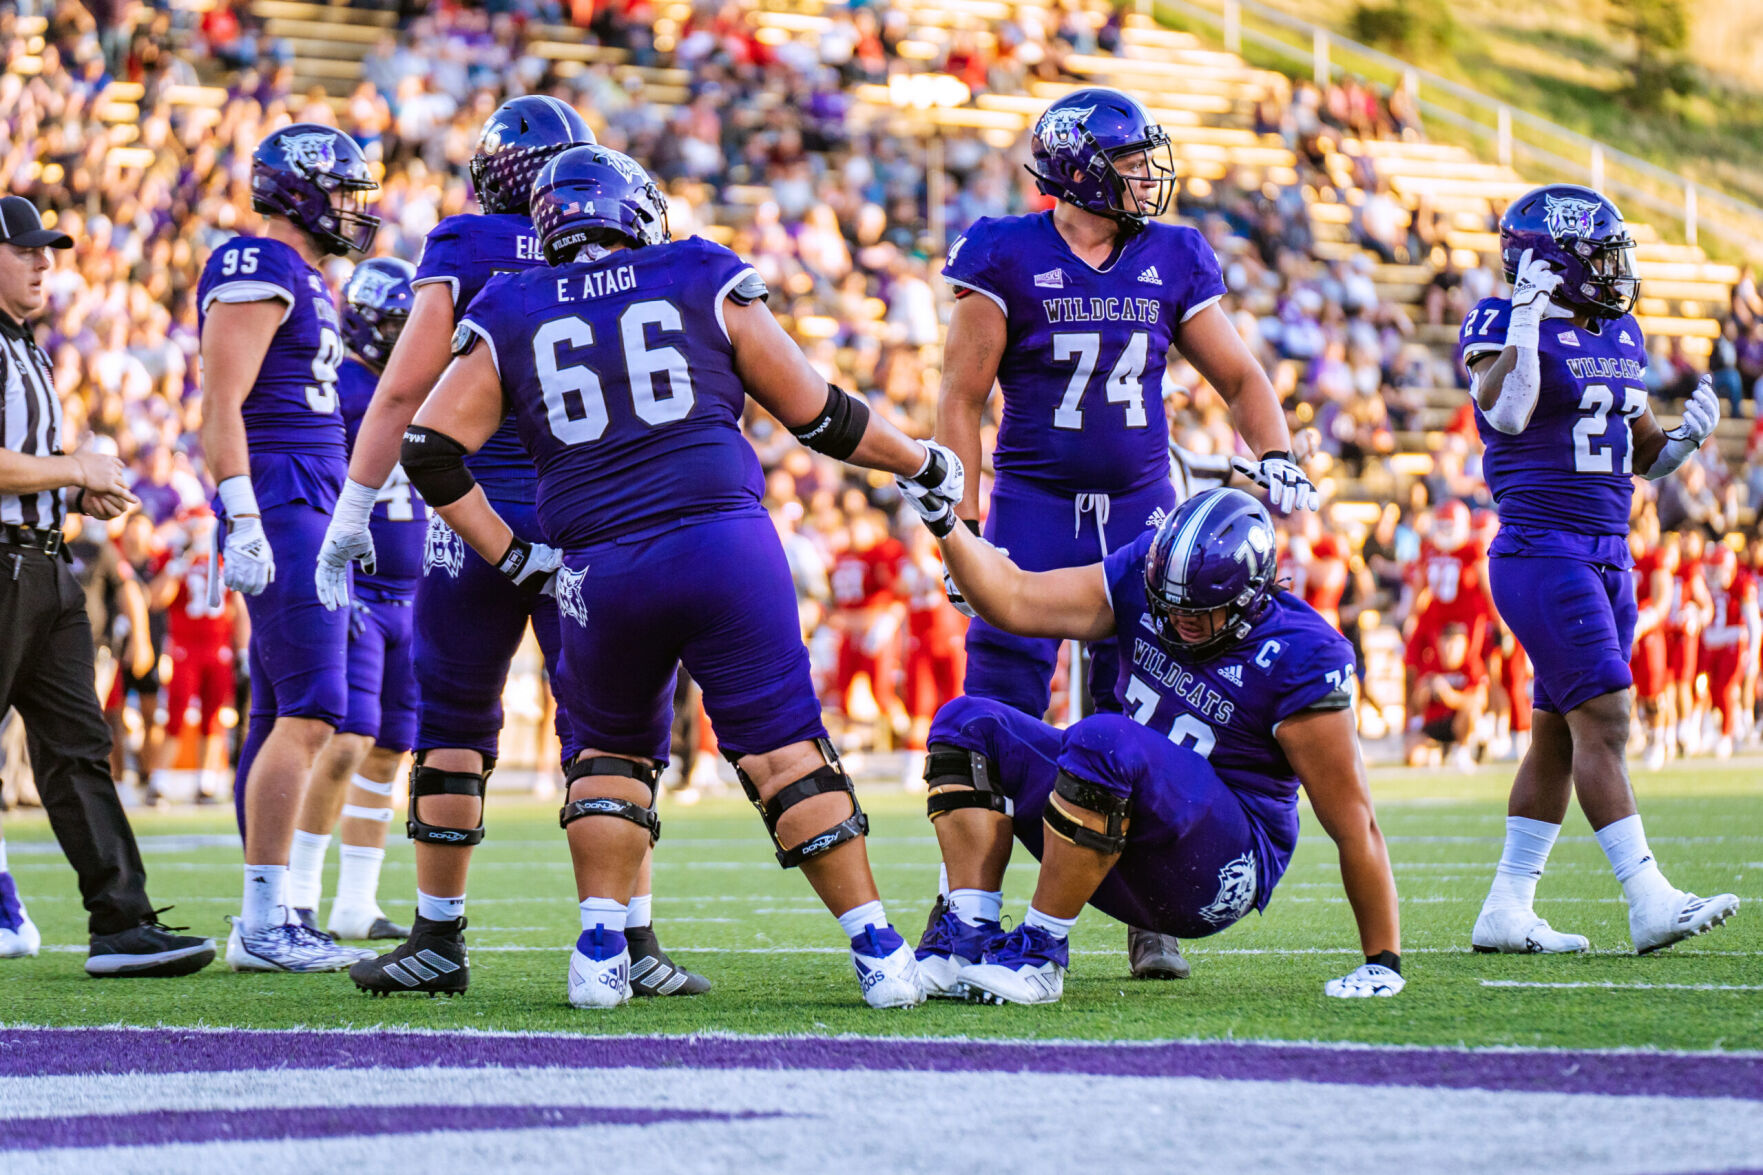 Weber State near full strength heading into top-5 battle with wounded Montana State